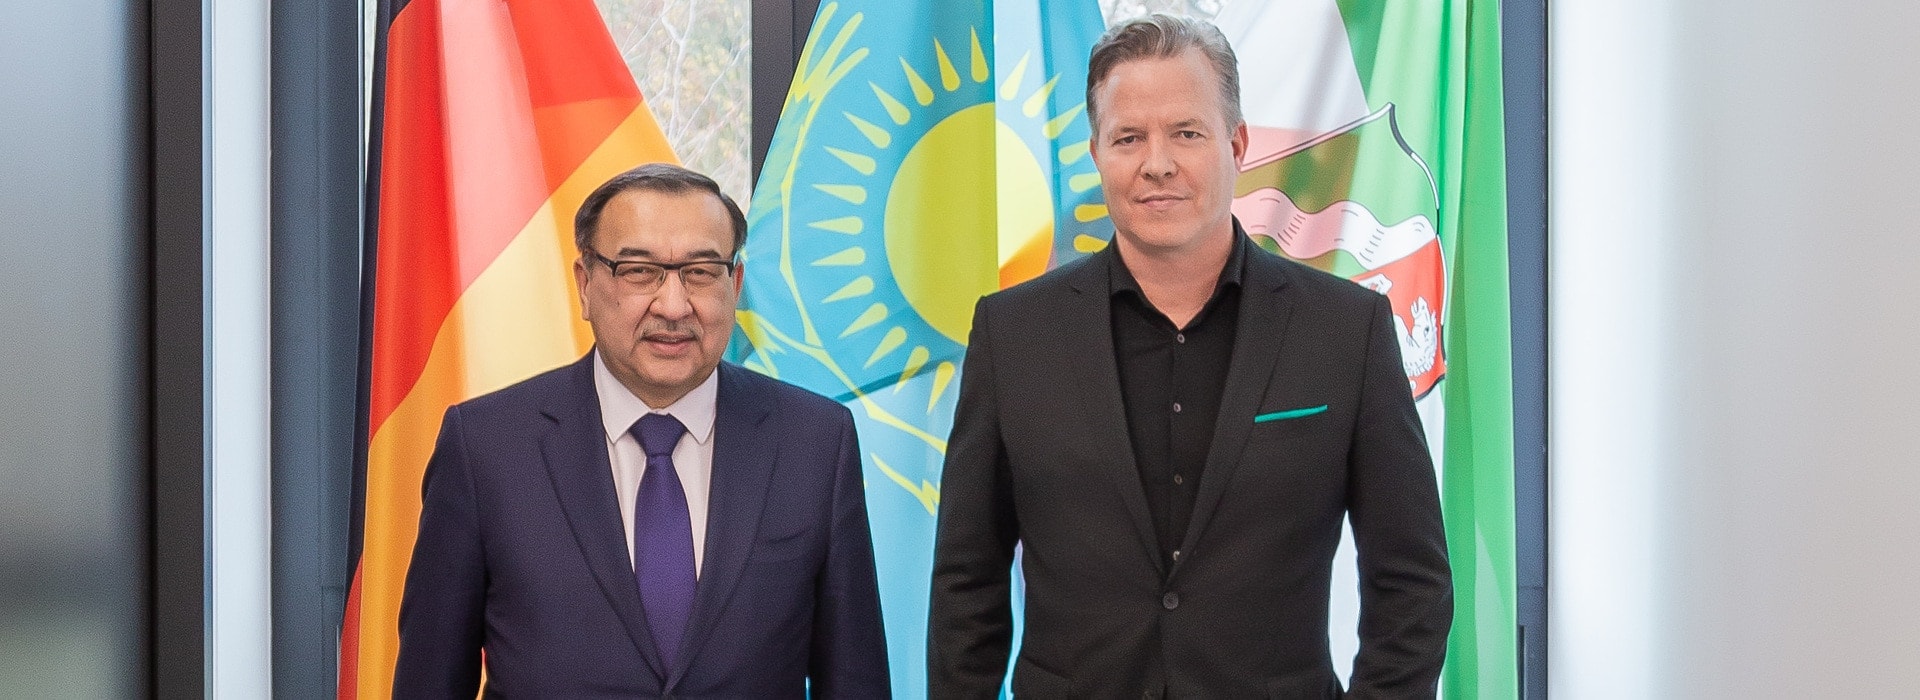 Oliver Hermes, President & CEO of the Wilo Group, met the Ambassador of the Republic of Kazakhstan to Germany, H.E. Nurlan Onzhanov, at the company’s headquarters in Dortmund, where he was congratulated on the 150th anniversary of the company and received an honour for his extraordinary commitment to German-Kazakhstani relations.